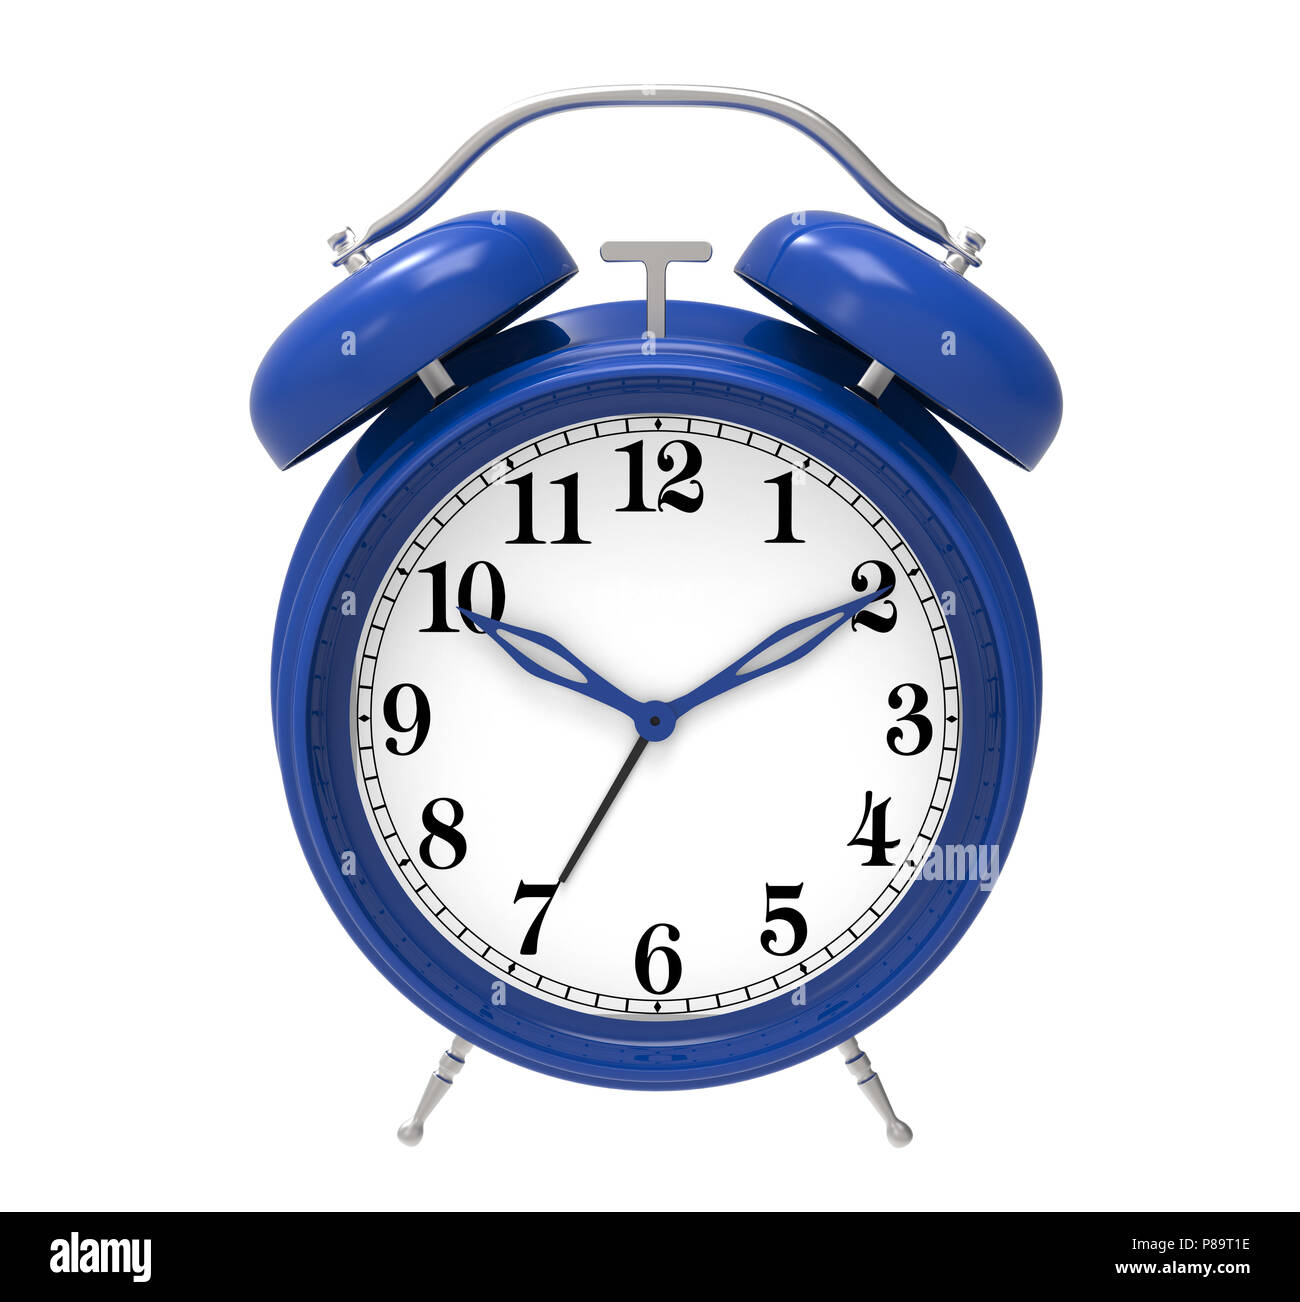 Alarm Cut Out Stock Images & Pictures - Alamy